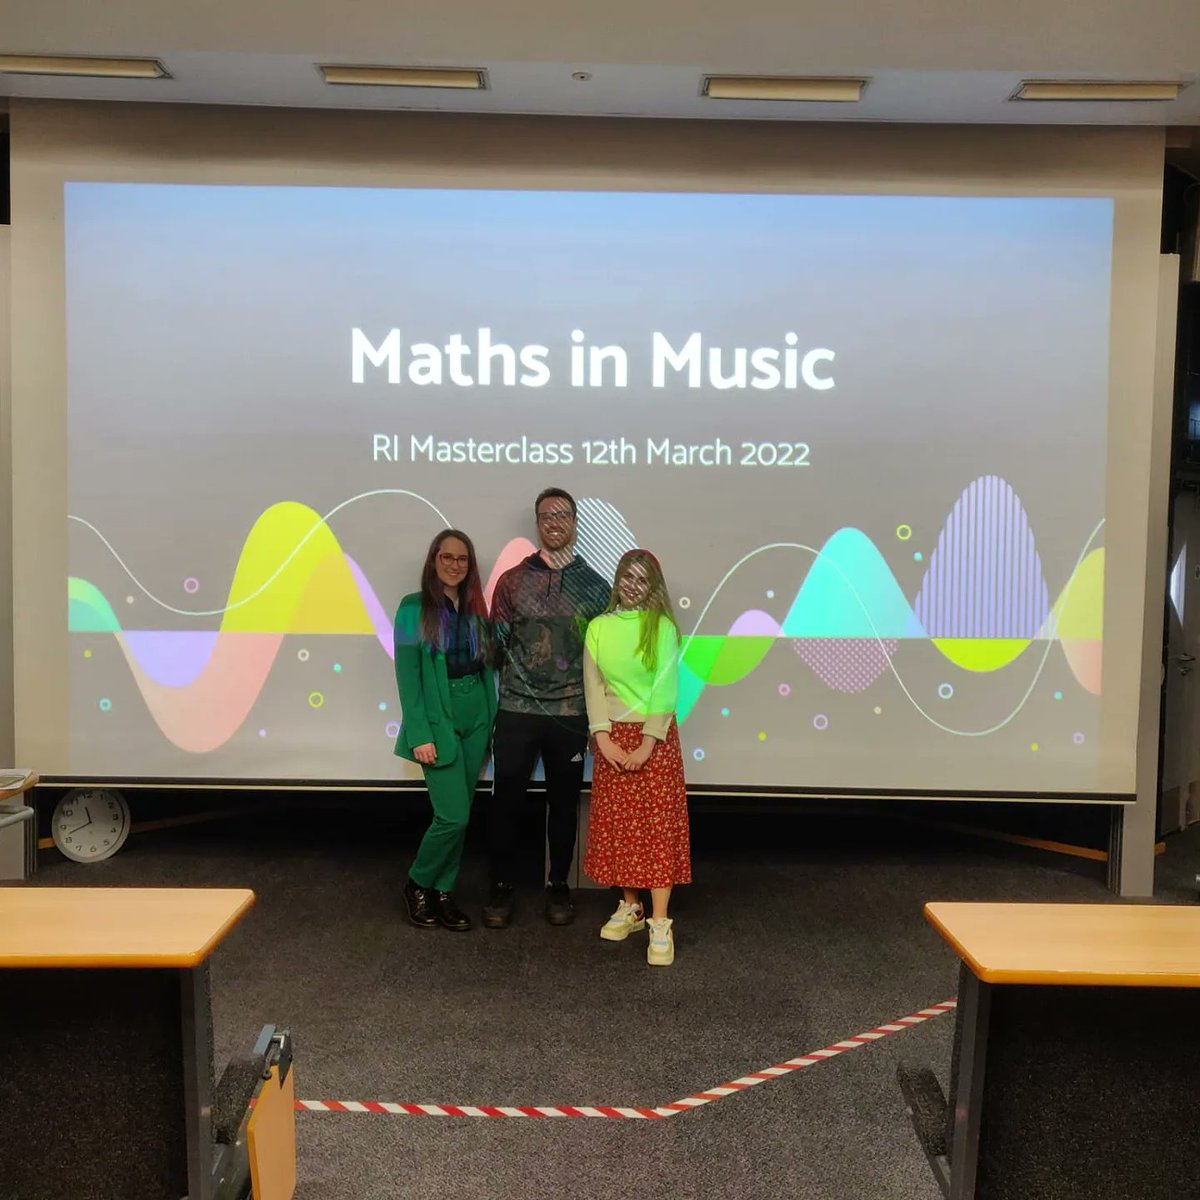 Had an absolute blast today taking part in my first ever @Ri_Science Maths Masterclass at @UniofBath ! Absolute pleasure working with Jenny and Alex to develop a talk on the relationship between maths and music. There was so much to fit in 2 hours but we just about managed! https://t.co/YlqpPHngQV